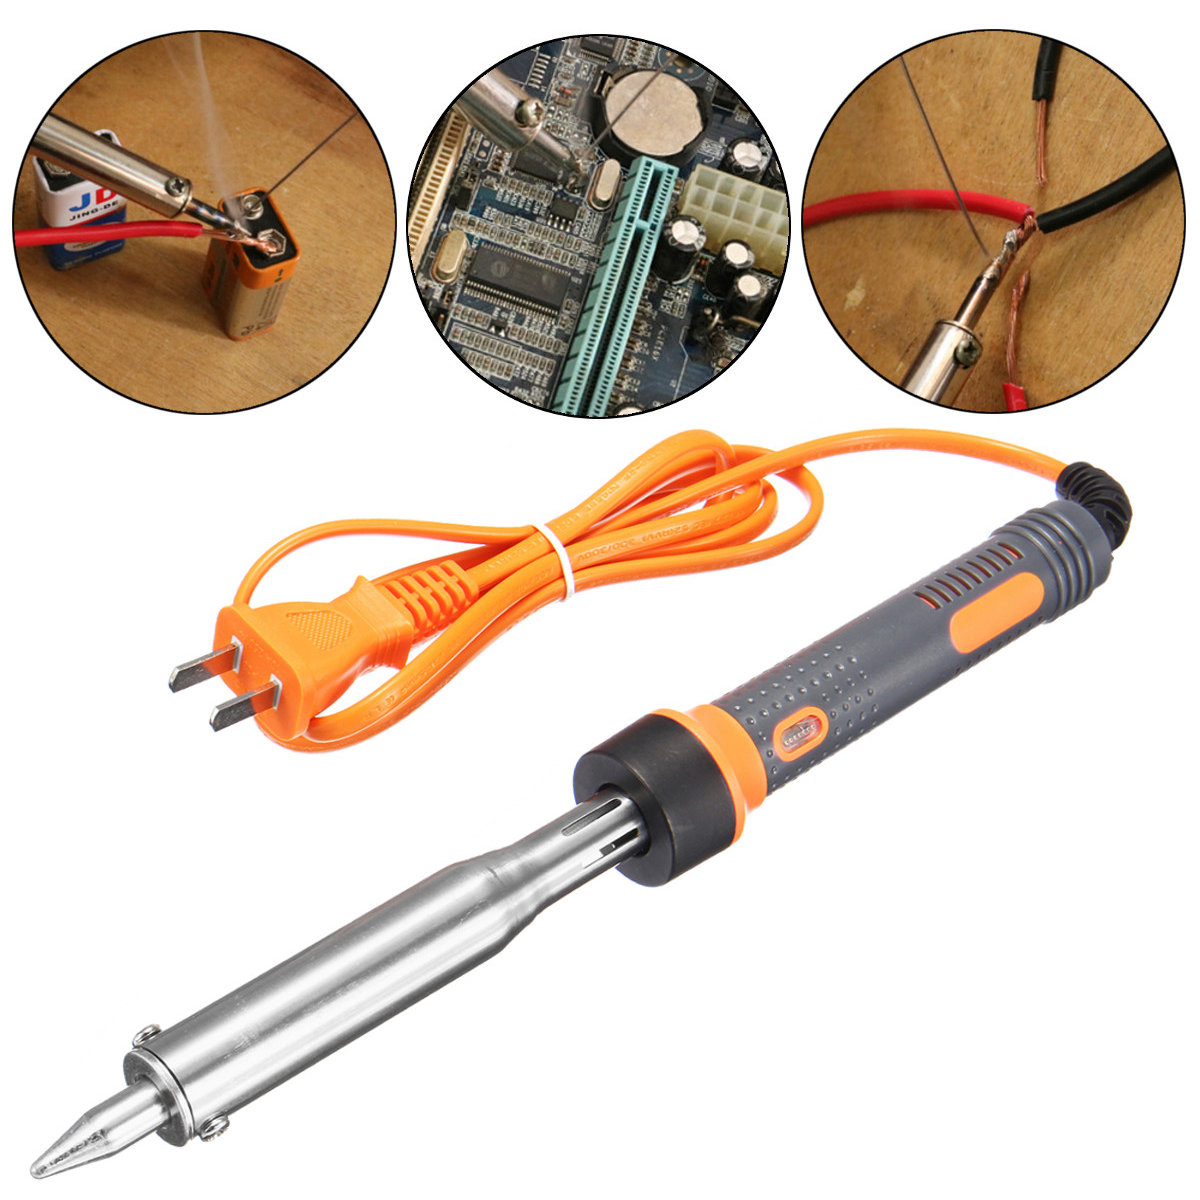 

220V 100W/150W Electric Heating Pencil Welding Solder Iron, White